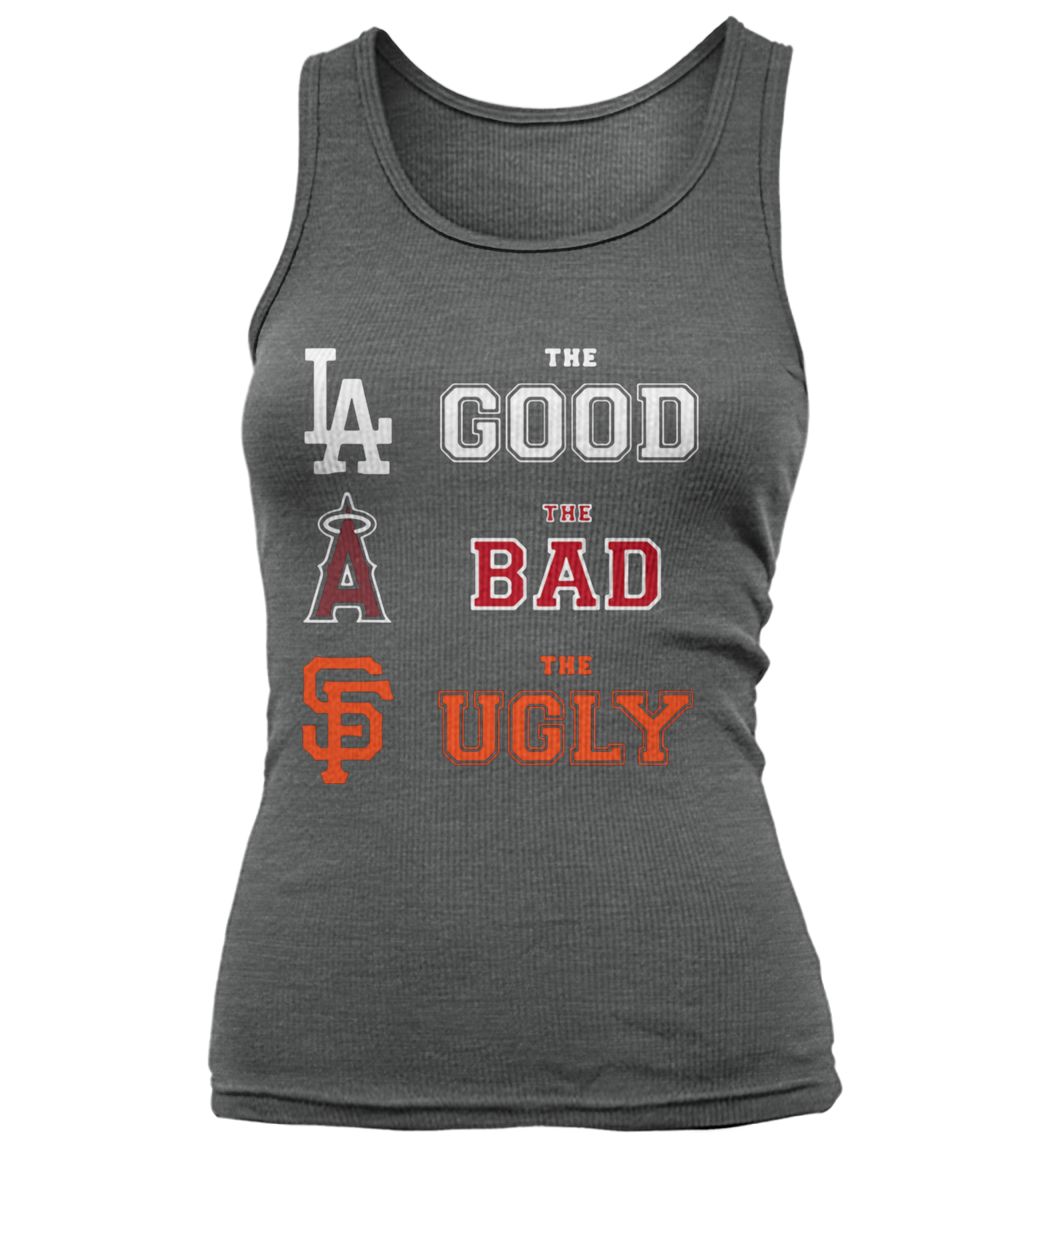 MLB dodgers the good angels of anaheim the bad san francisco giants the ugly women's tank top